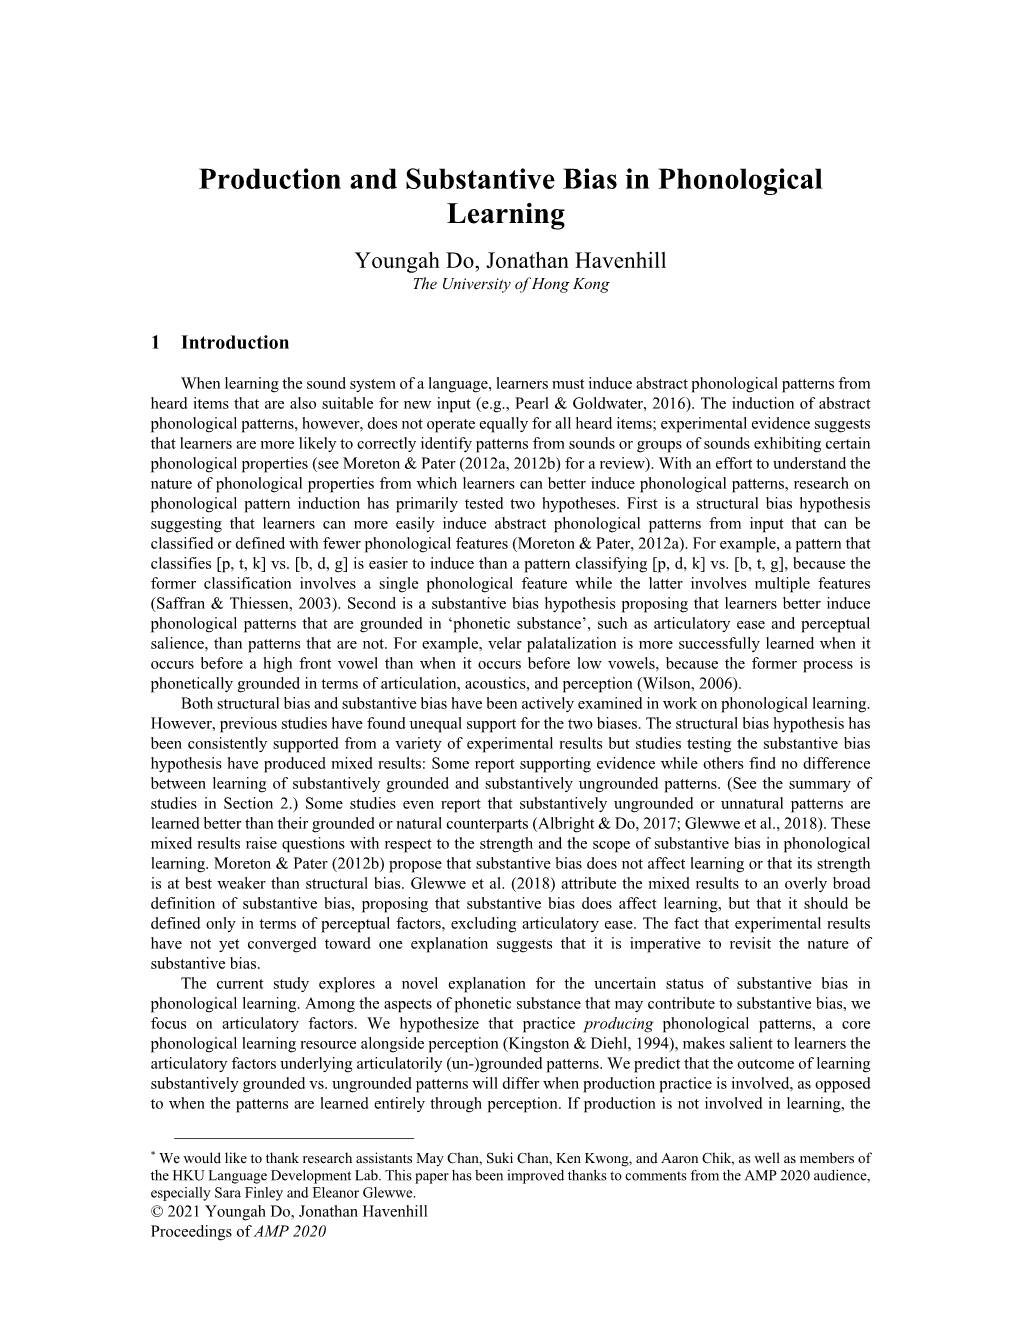 Production and Substantive Bias in Phonological Learning* Youngah Do, Jonathan Havenhill the University of Hong Kong